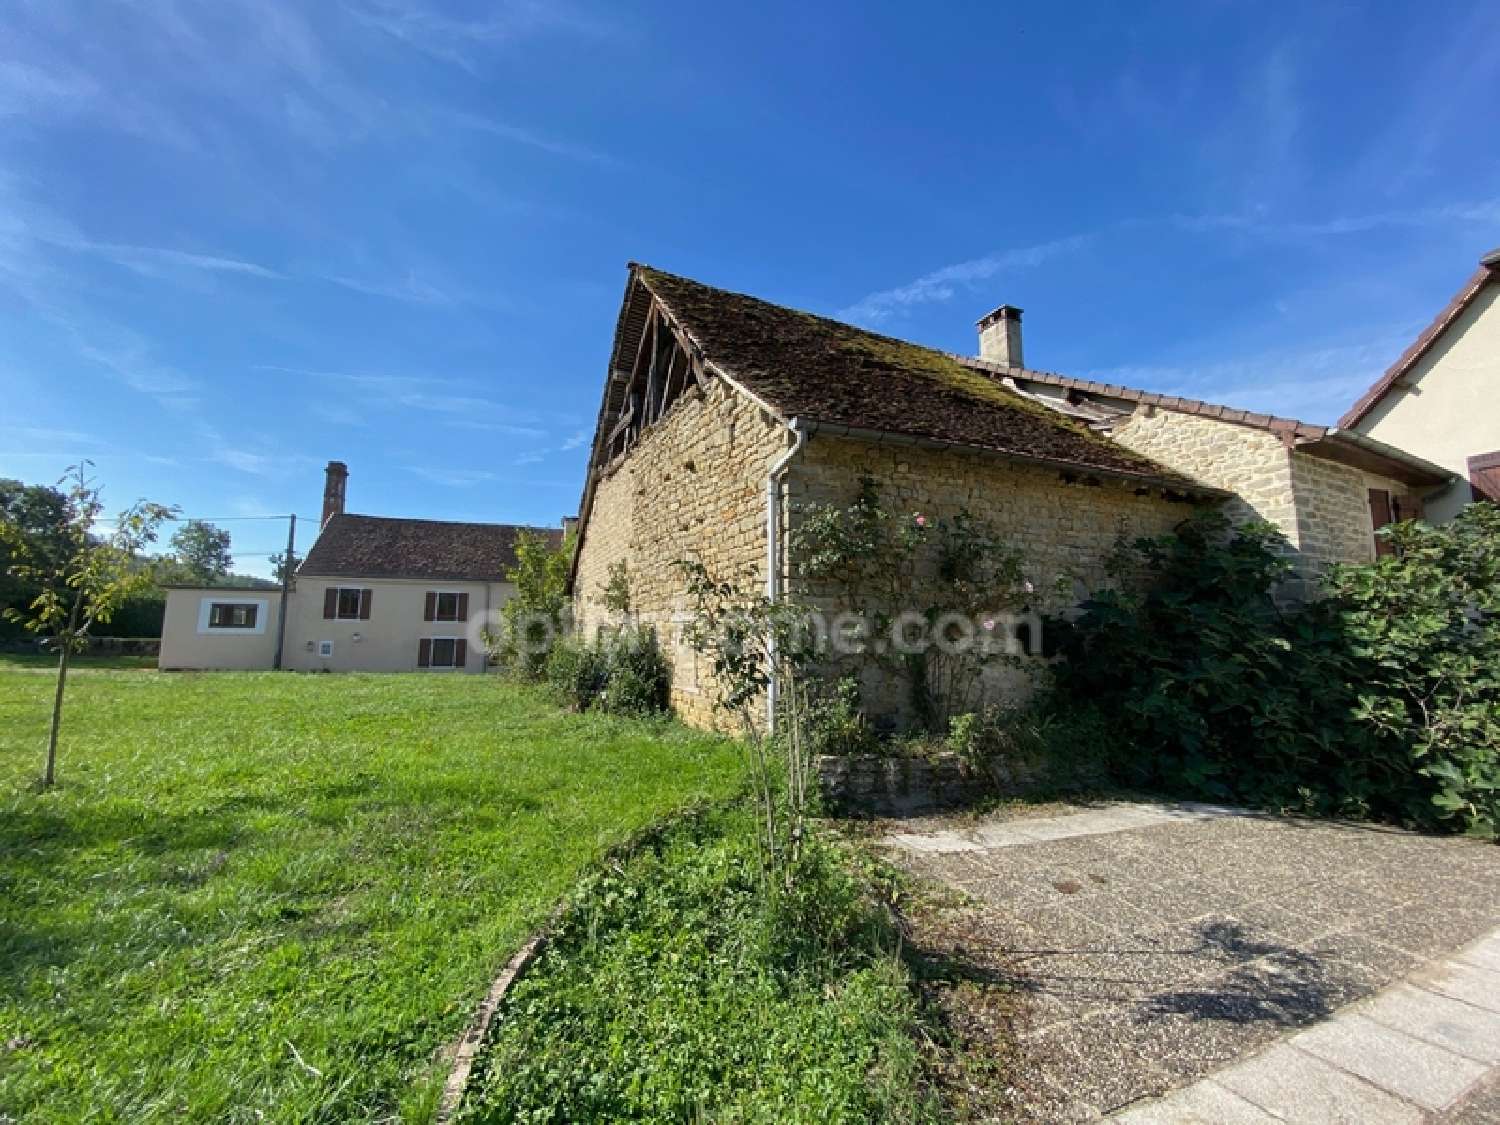  for sale house Darbonnay Jura 3